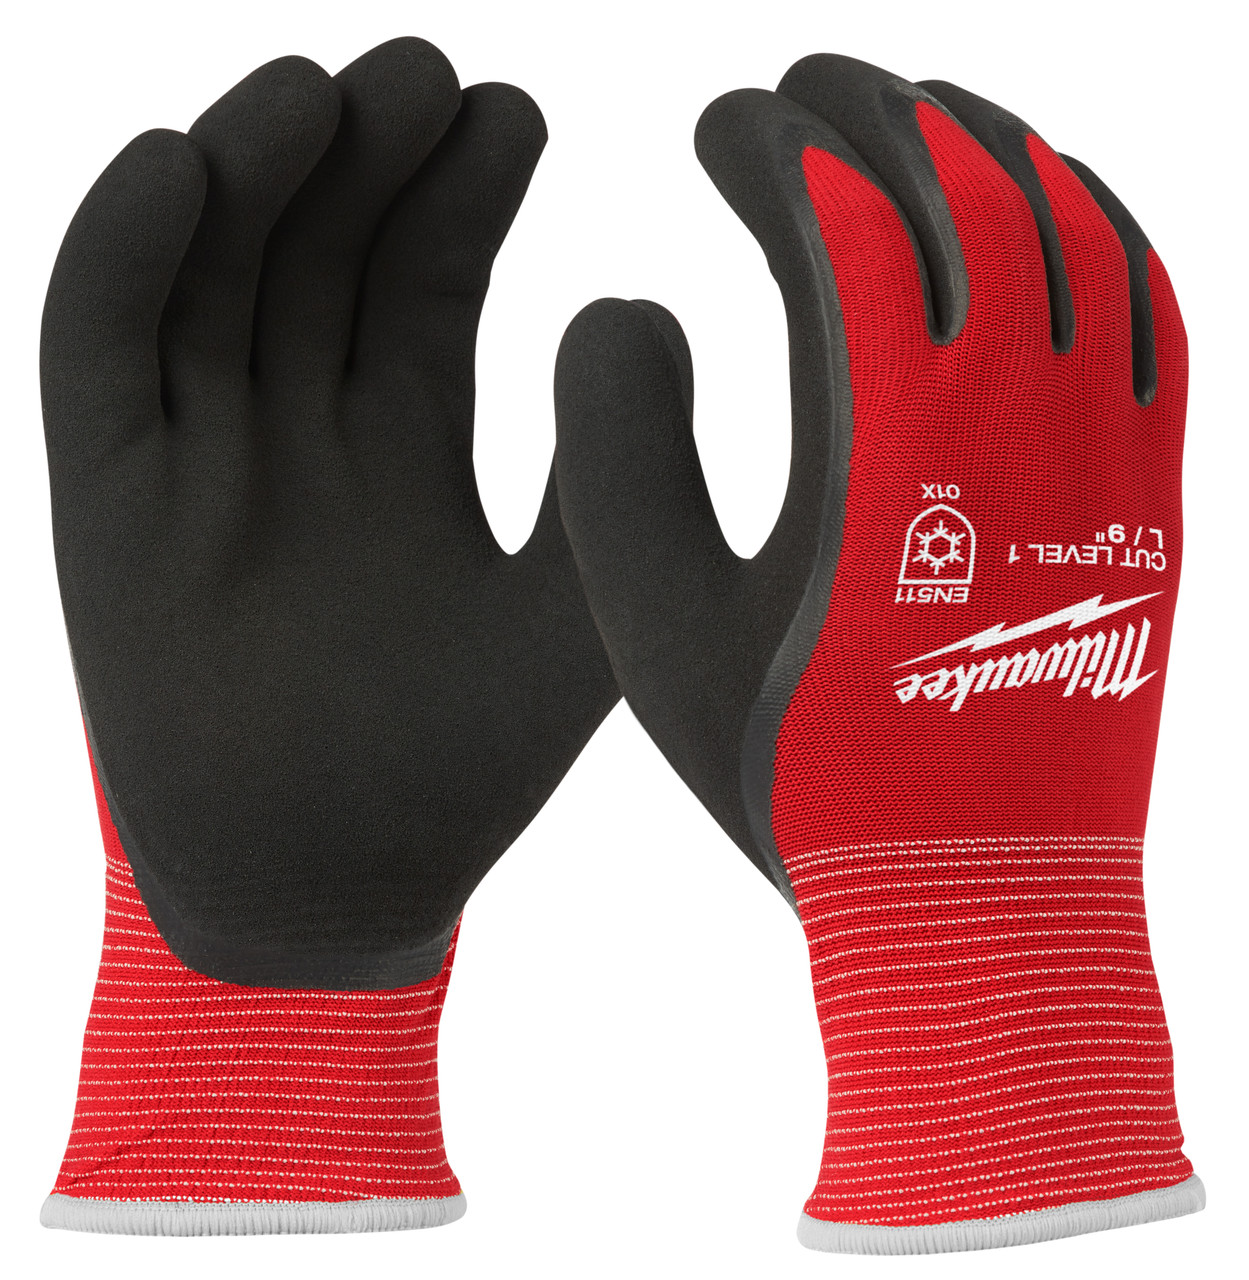 Cut Level 4 High-Dexterity Polyurethane Dipped Gloves - Large